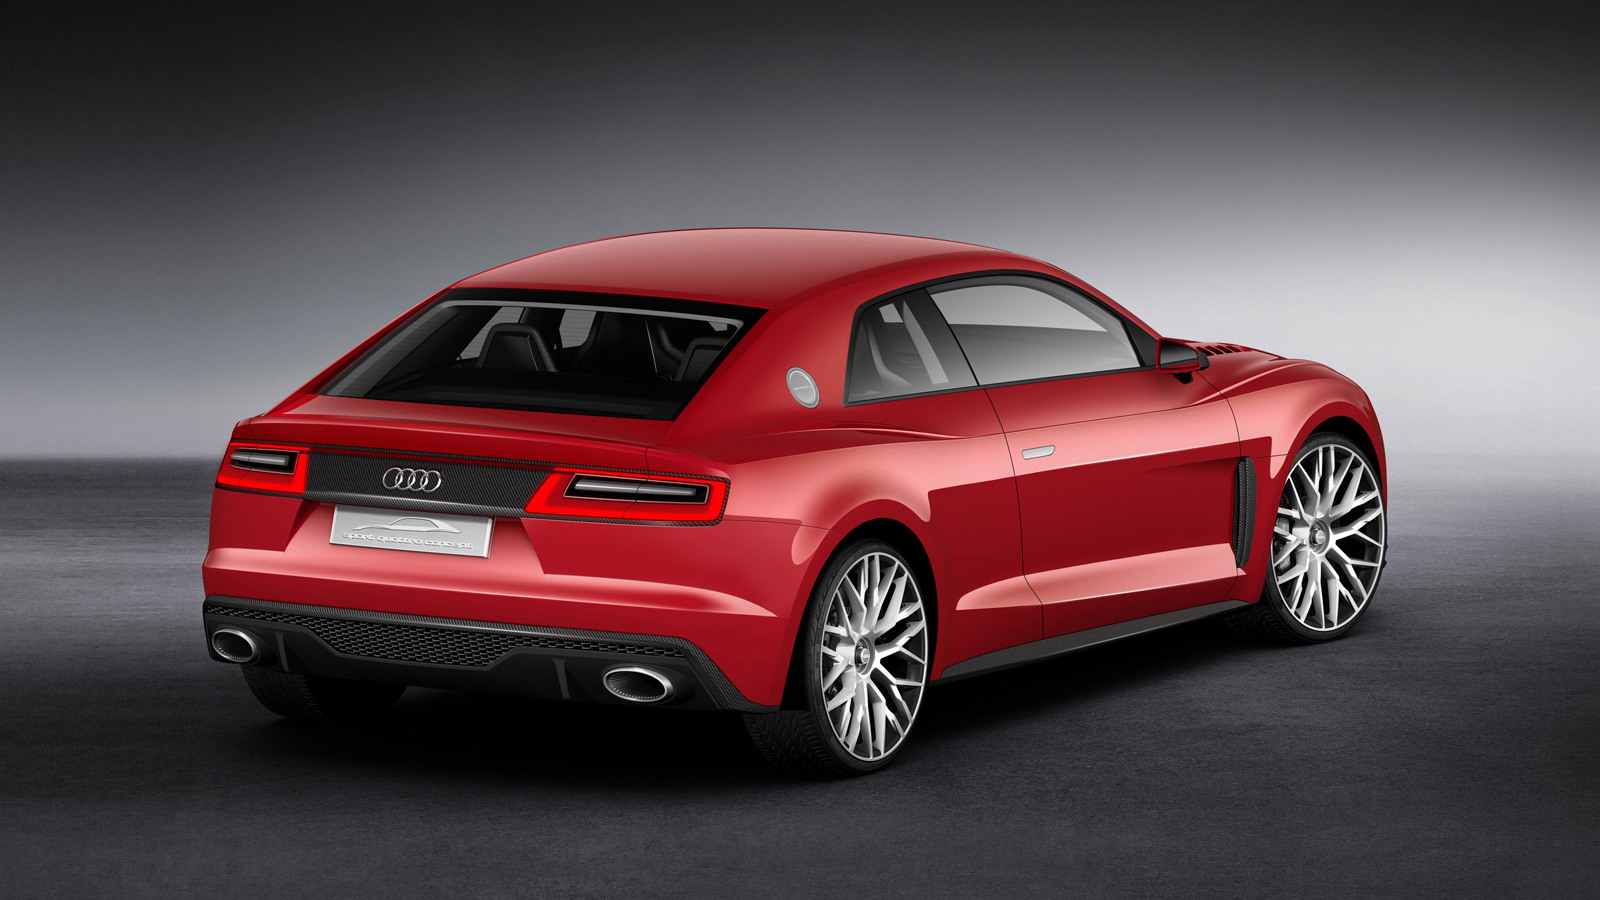 Audi Sport quattro concept with laser headlights, 2014 Consumer Electronics Show